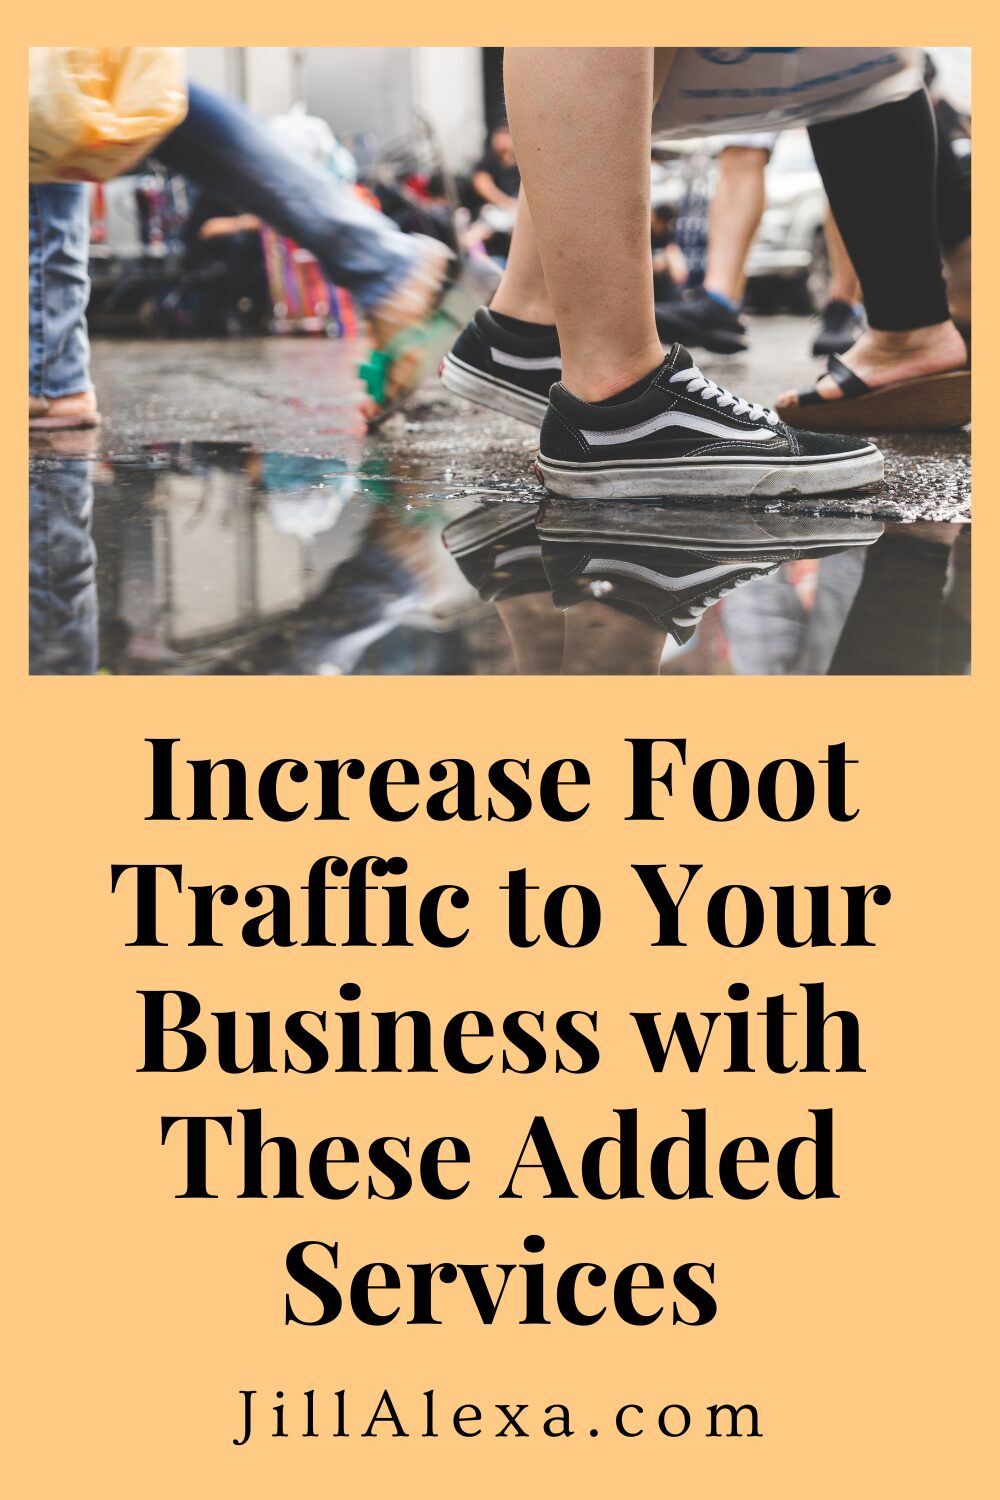 Promoting your brick-and-mortar business can be a challenge in today's digital age. Here are 8 value-adding services  to increase foot traffic to your business.